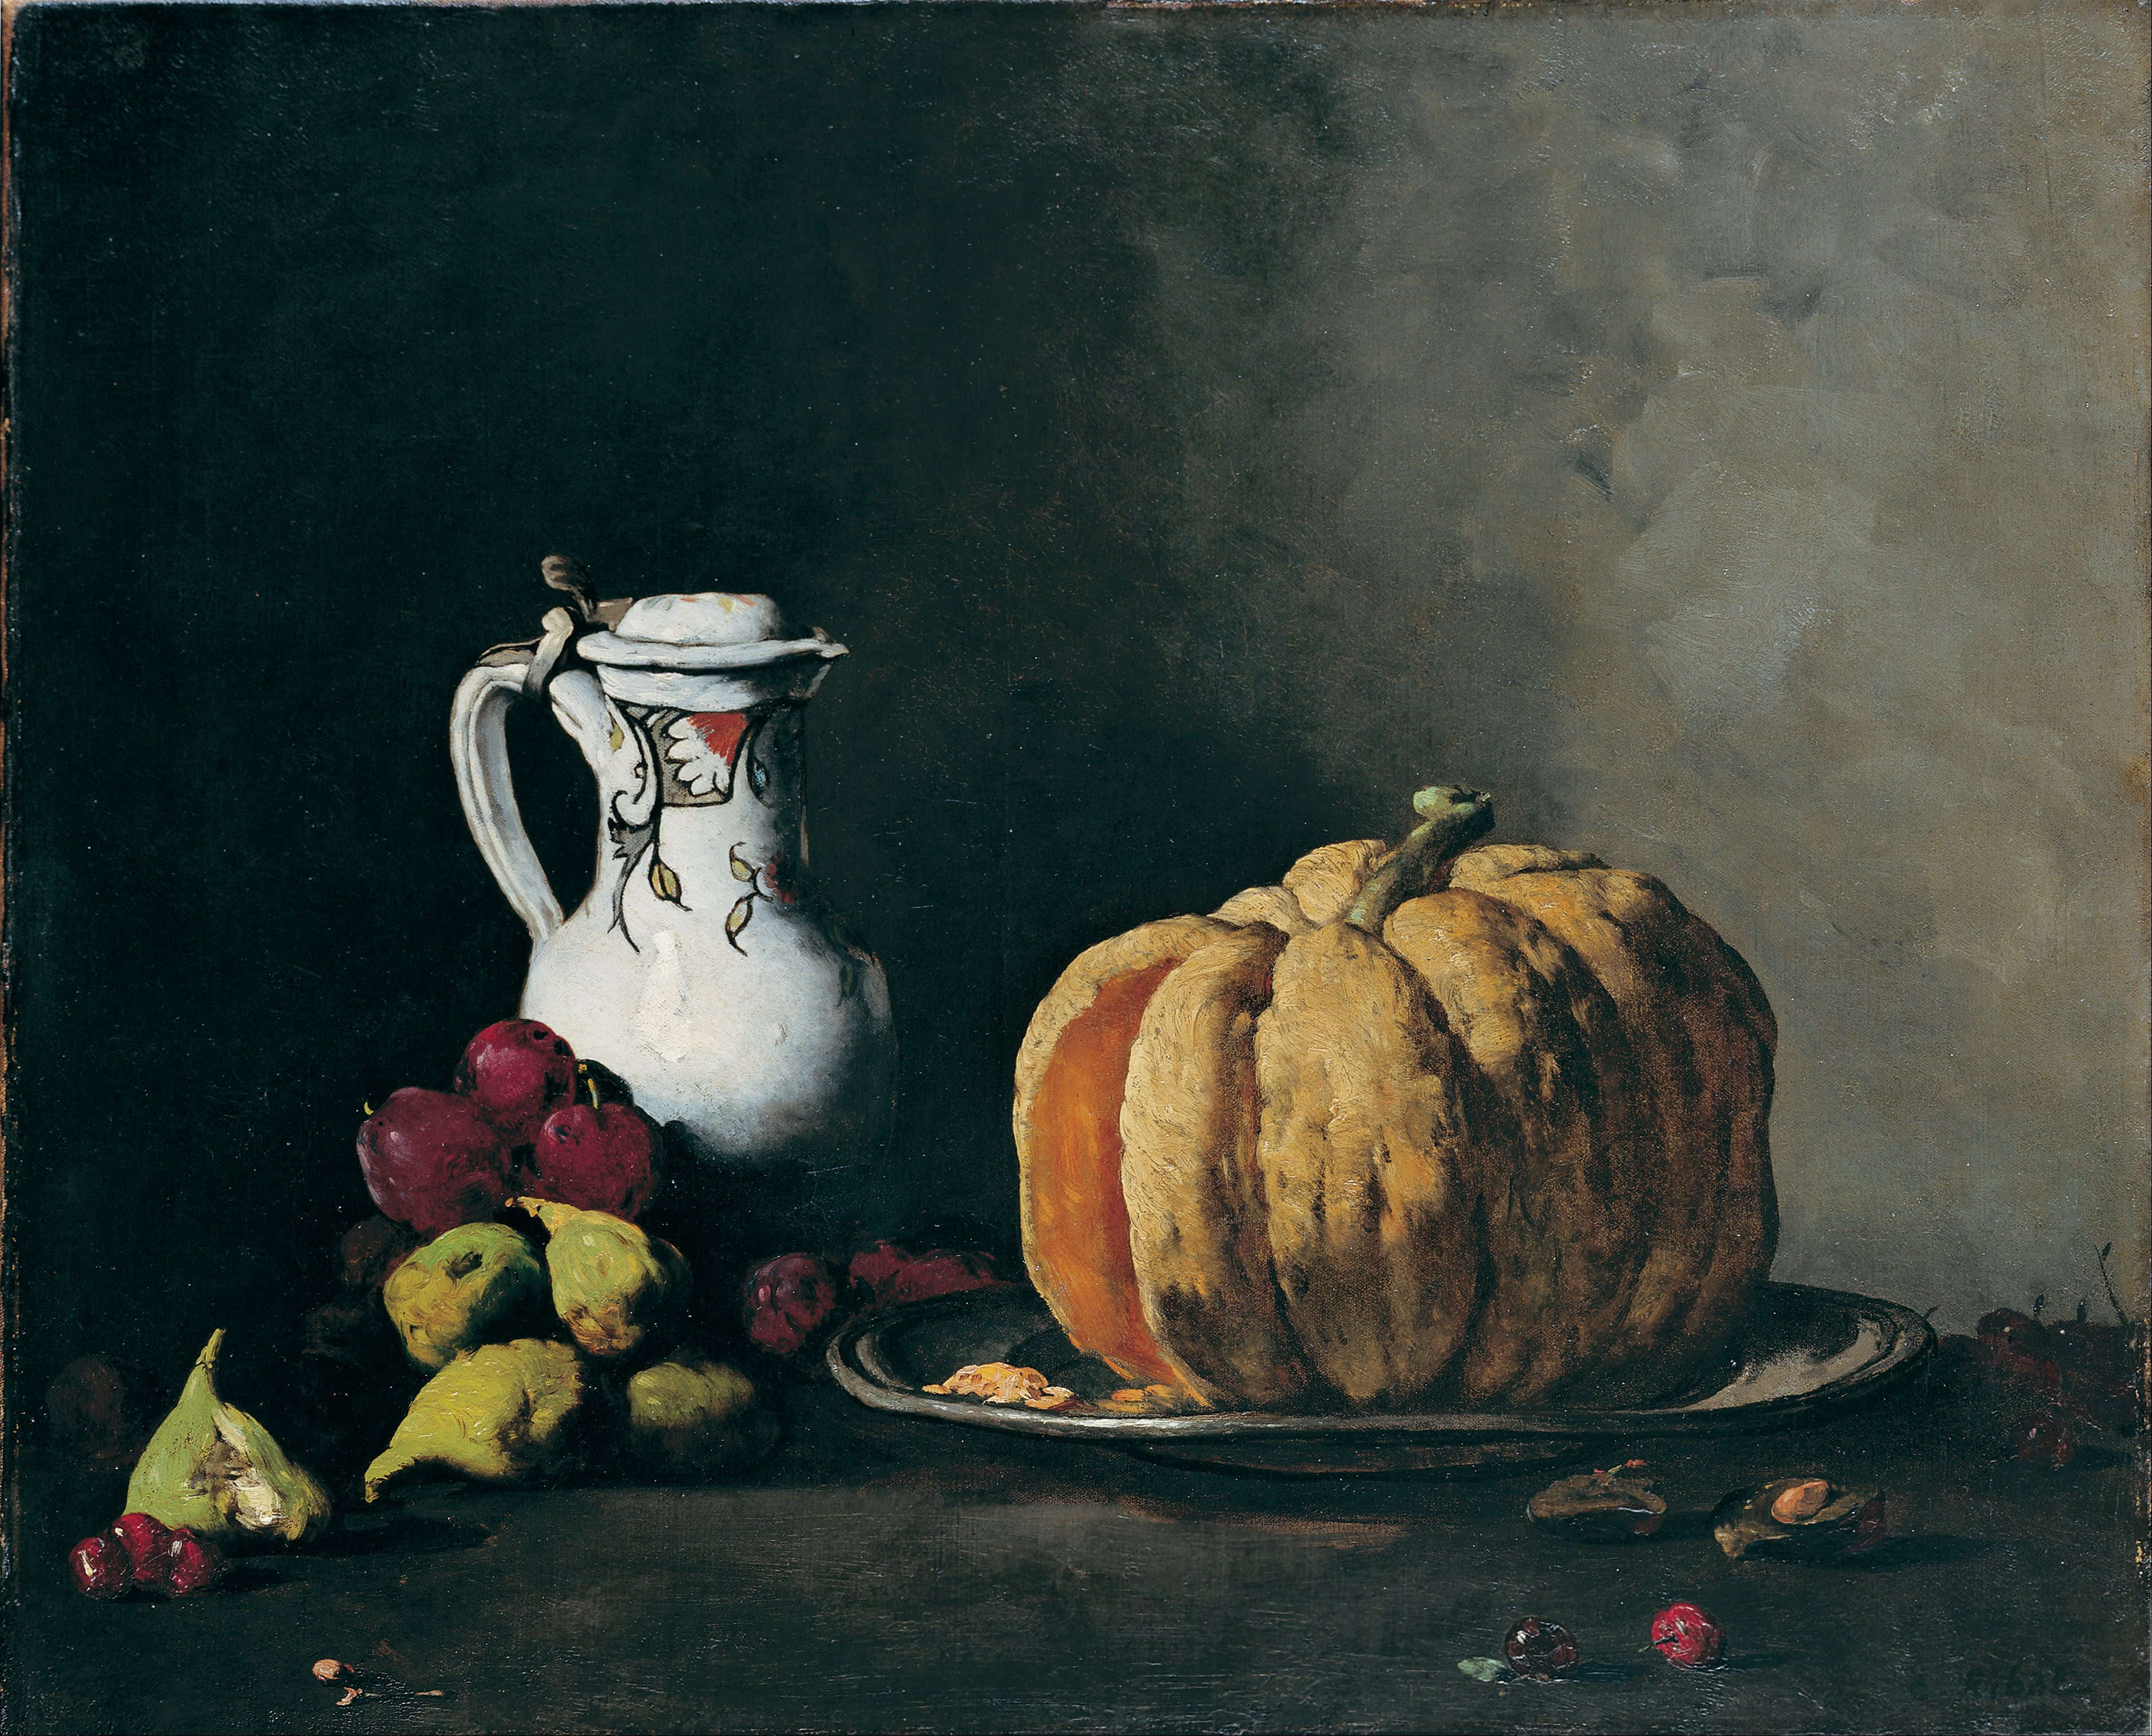 Théodule-Augustin Ribot - Still Life with Pumpkin, Plums, Cherries, Figs and Jug - Google Art Project